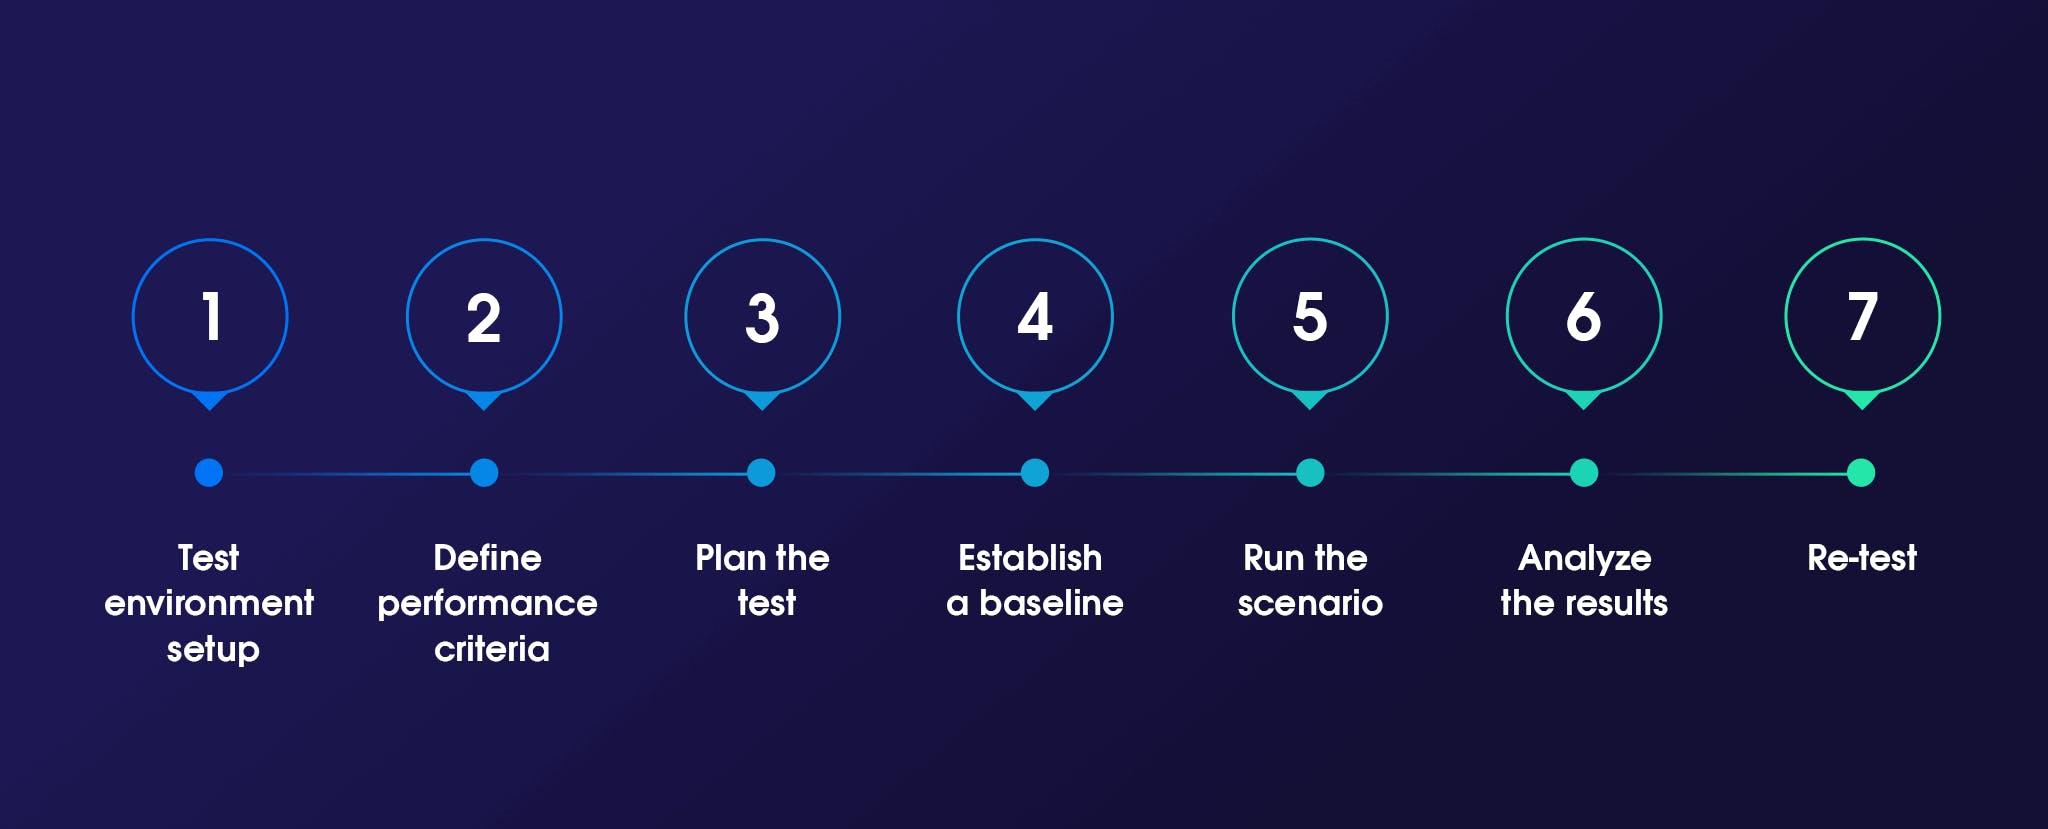 Main steps of performing a load test